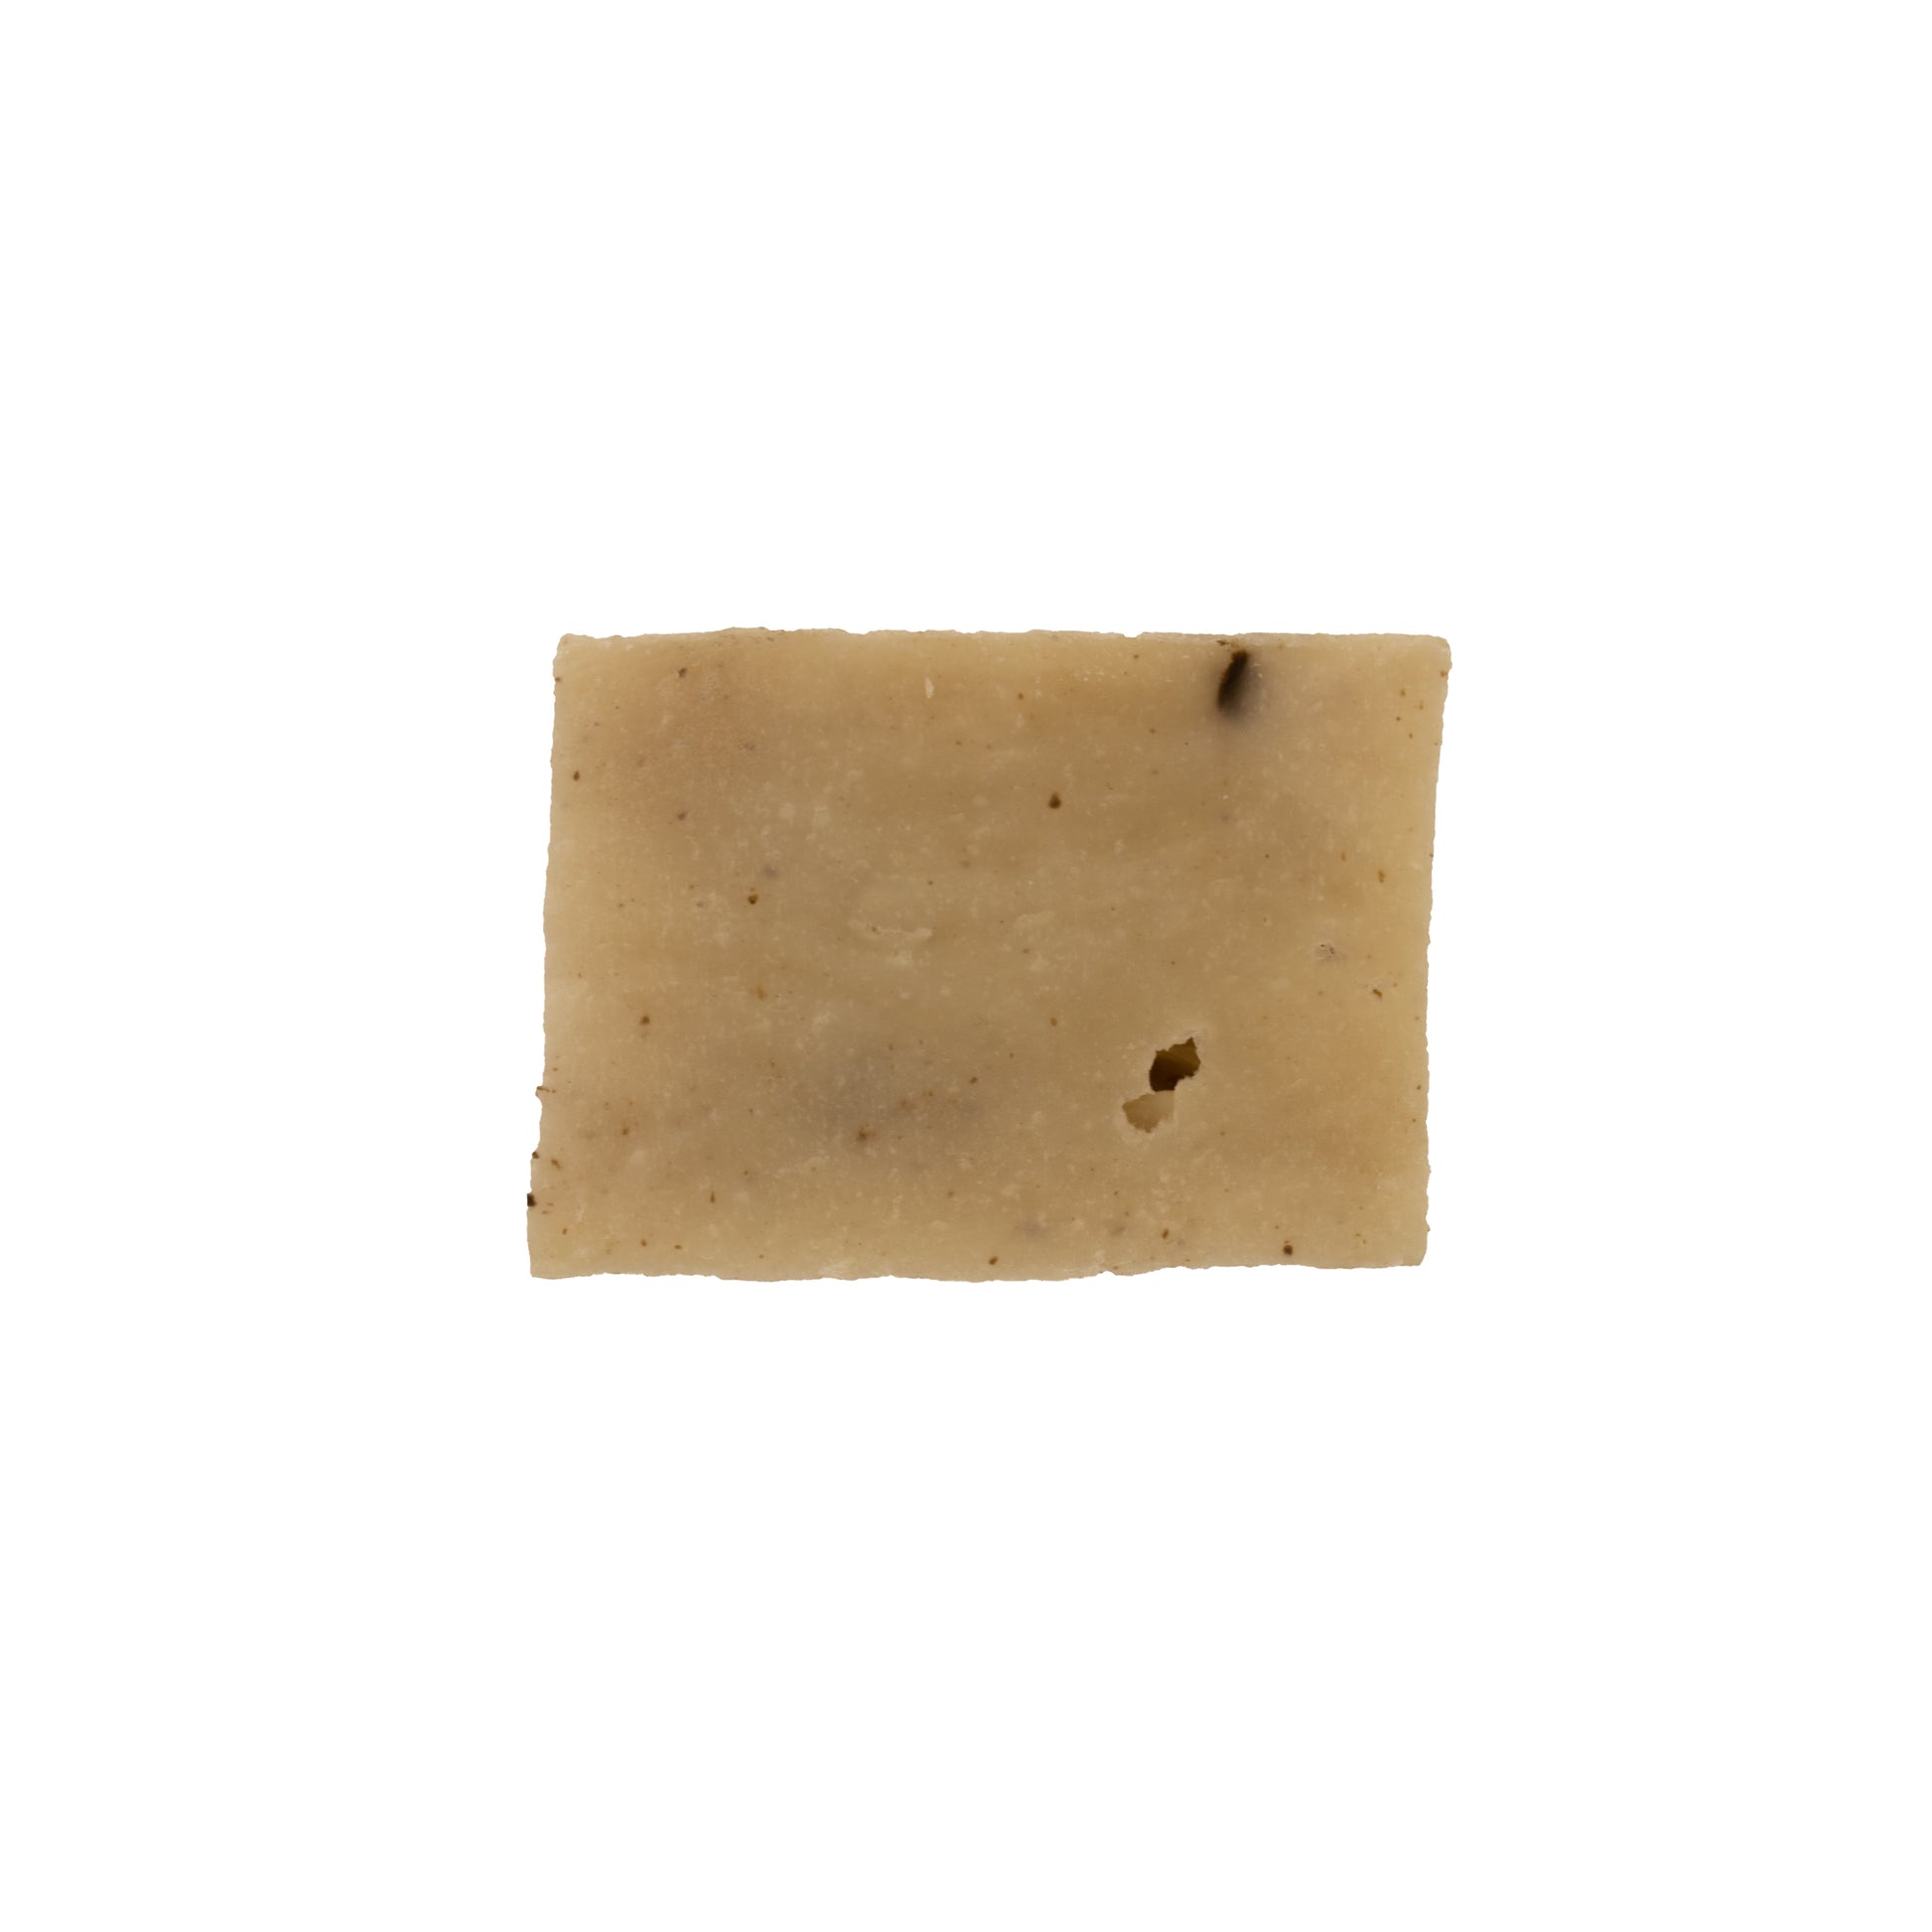 Brown soap bar with gray swirls on a white background.